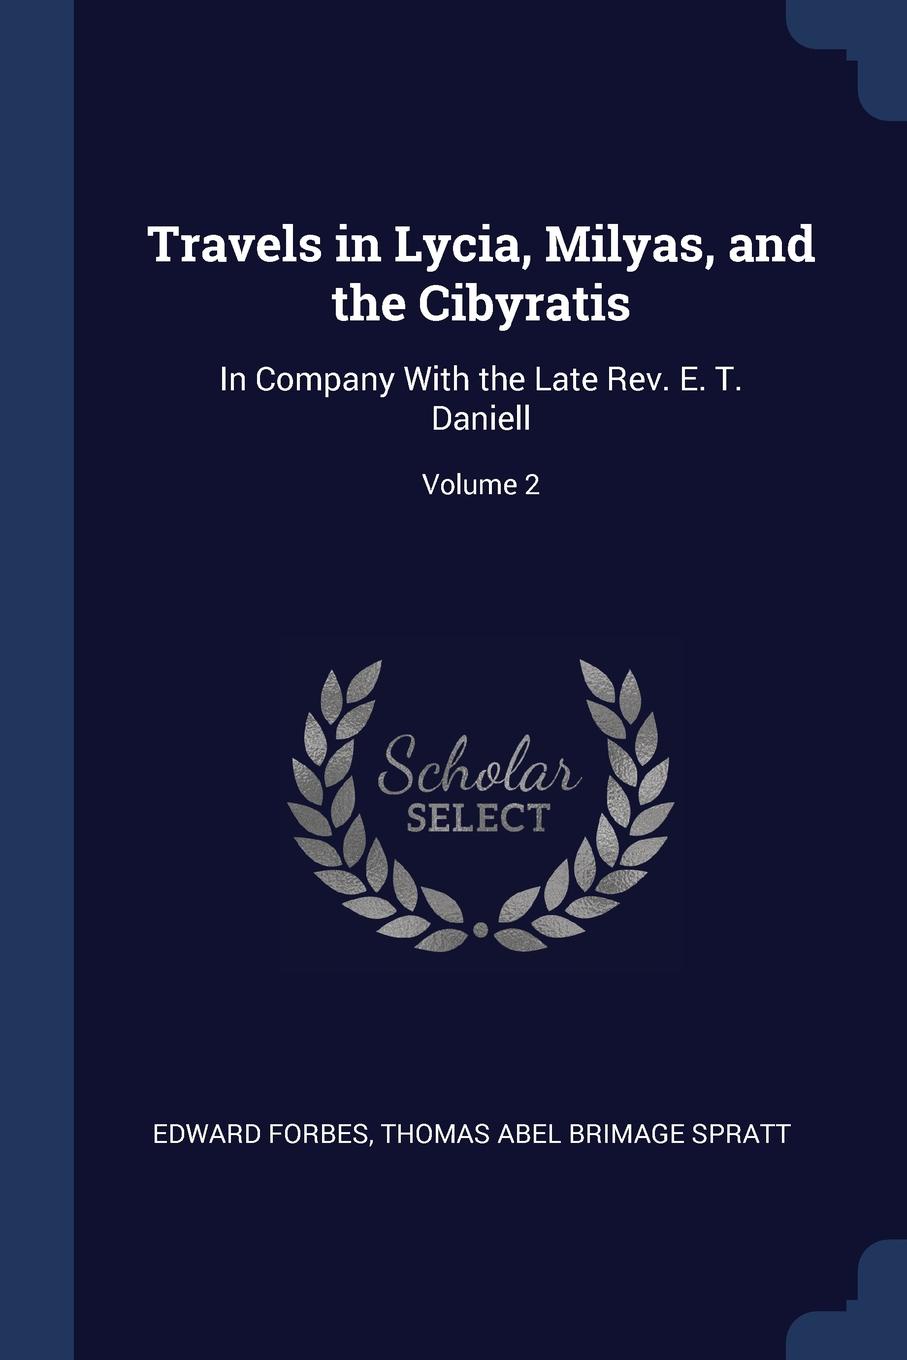 Travels in Lycia, Milyas, and the Cibyratis. In Company With the Late Rev. E. T. Daniell; Volume 2